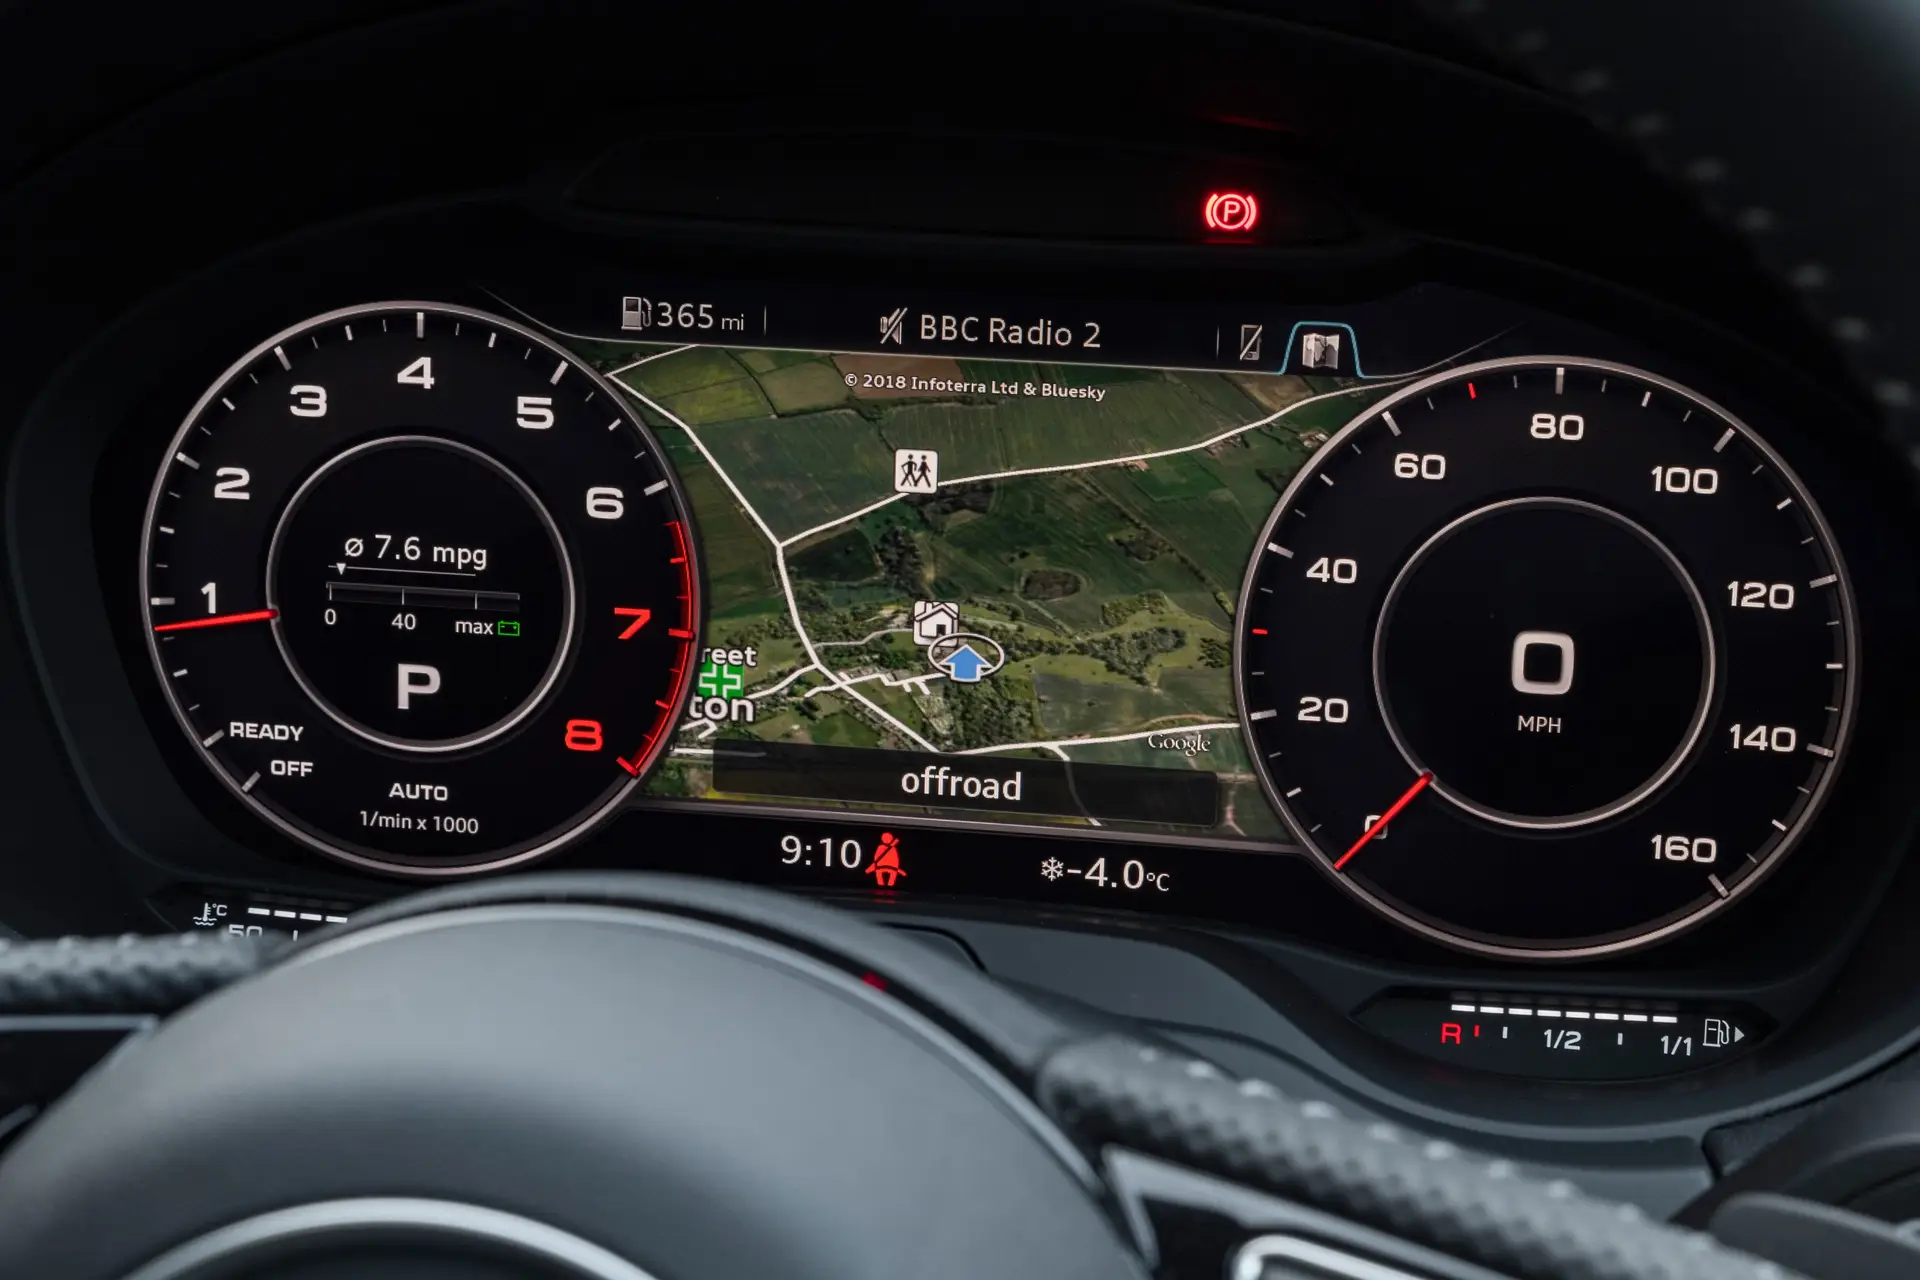 Audi A3 Sportback (2013-2020) Review: interior close up photo of the Audi A3 Sportback instruments